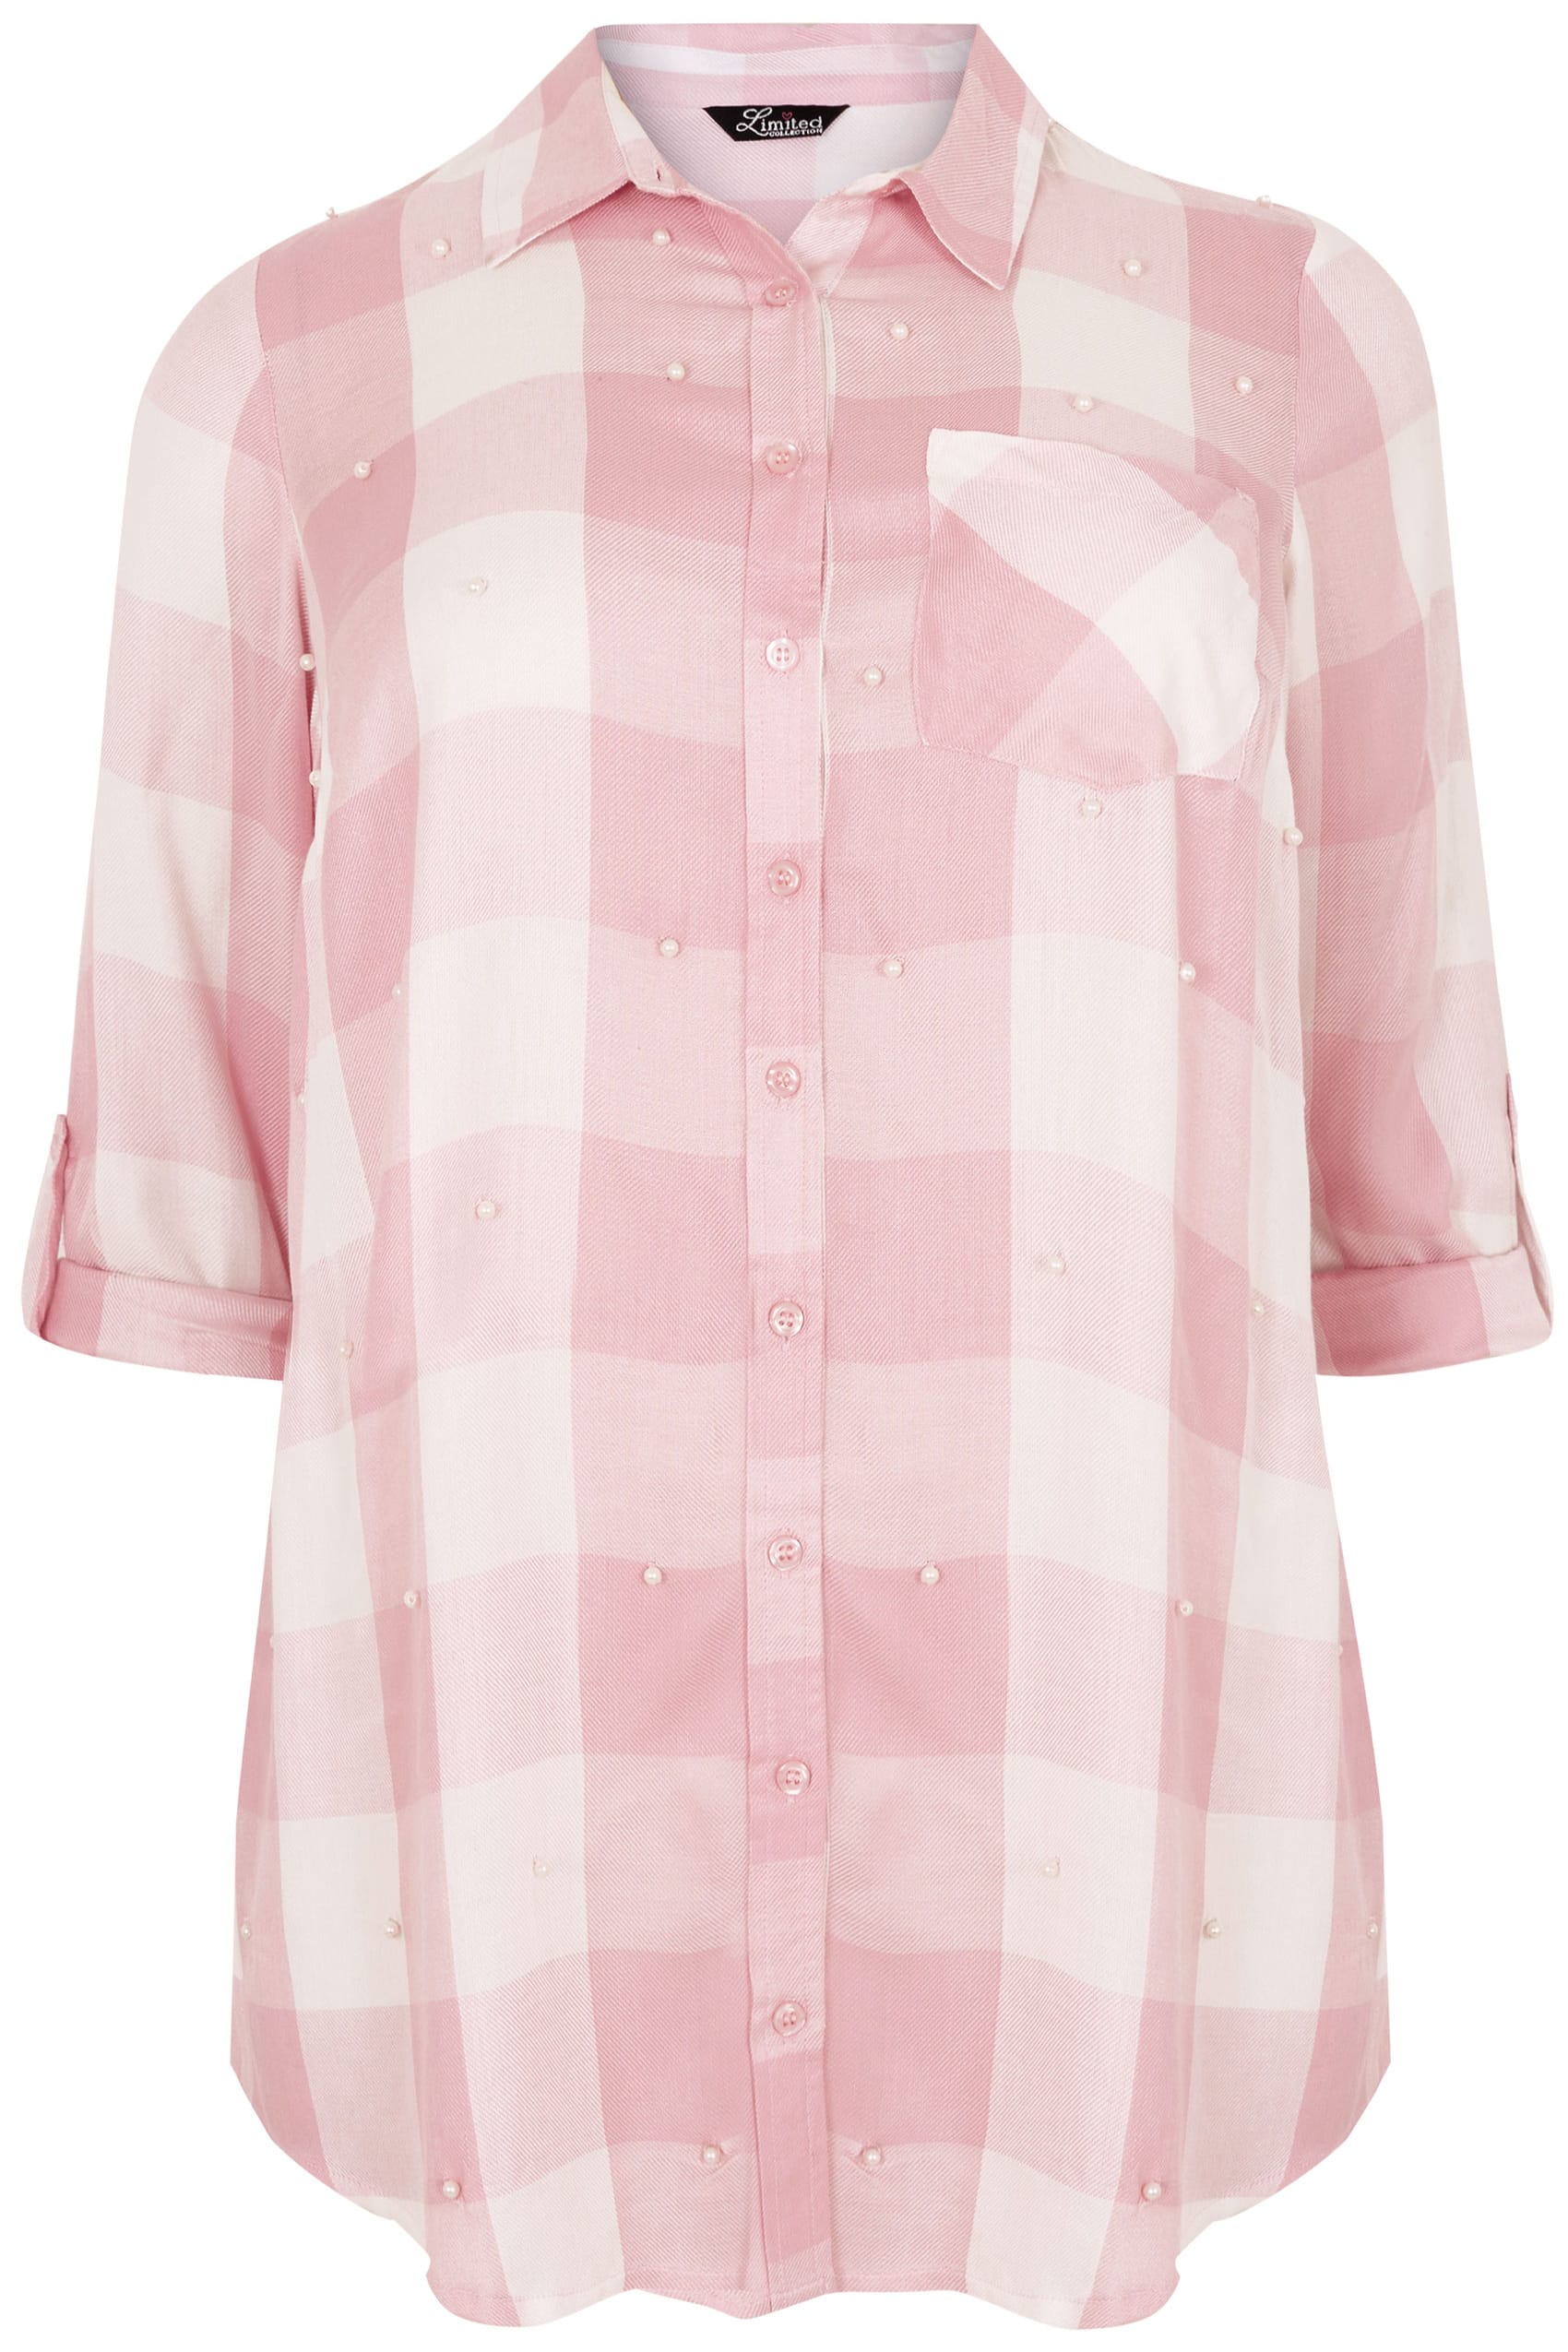 LIMITED COLLECTION Pink & White Checked Shirt With Pearlescent ...